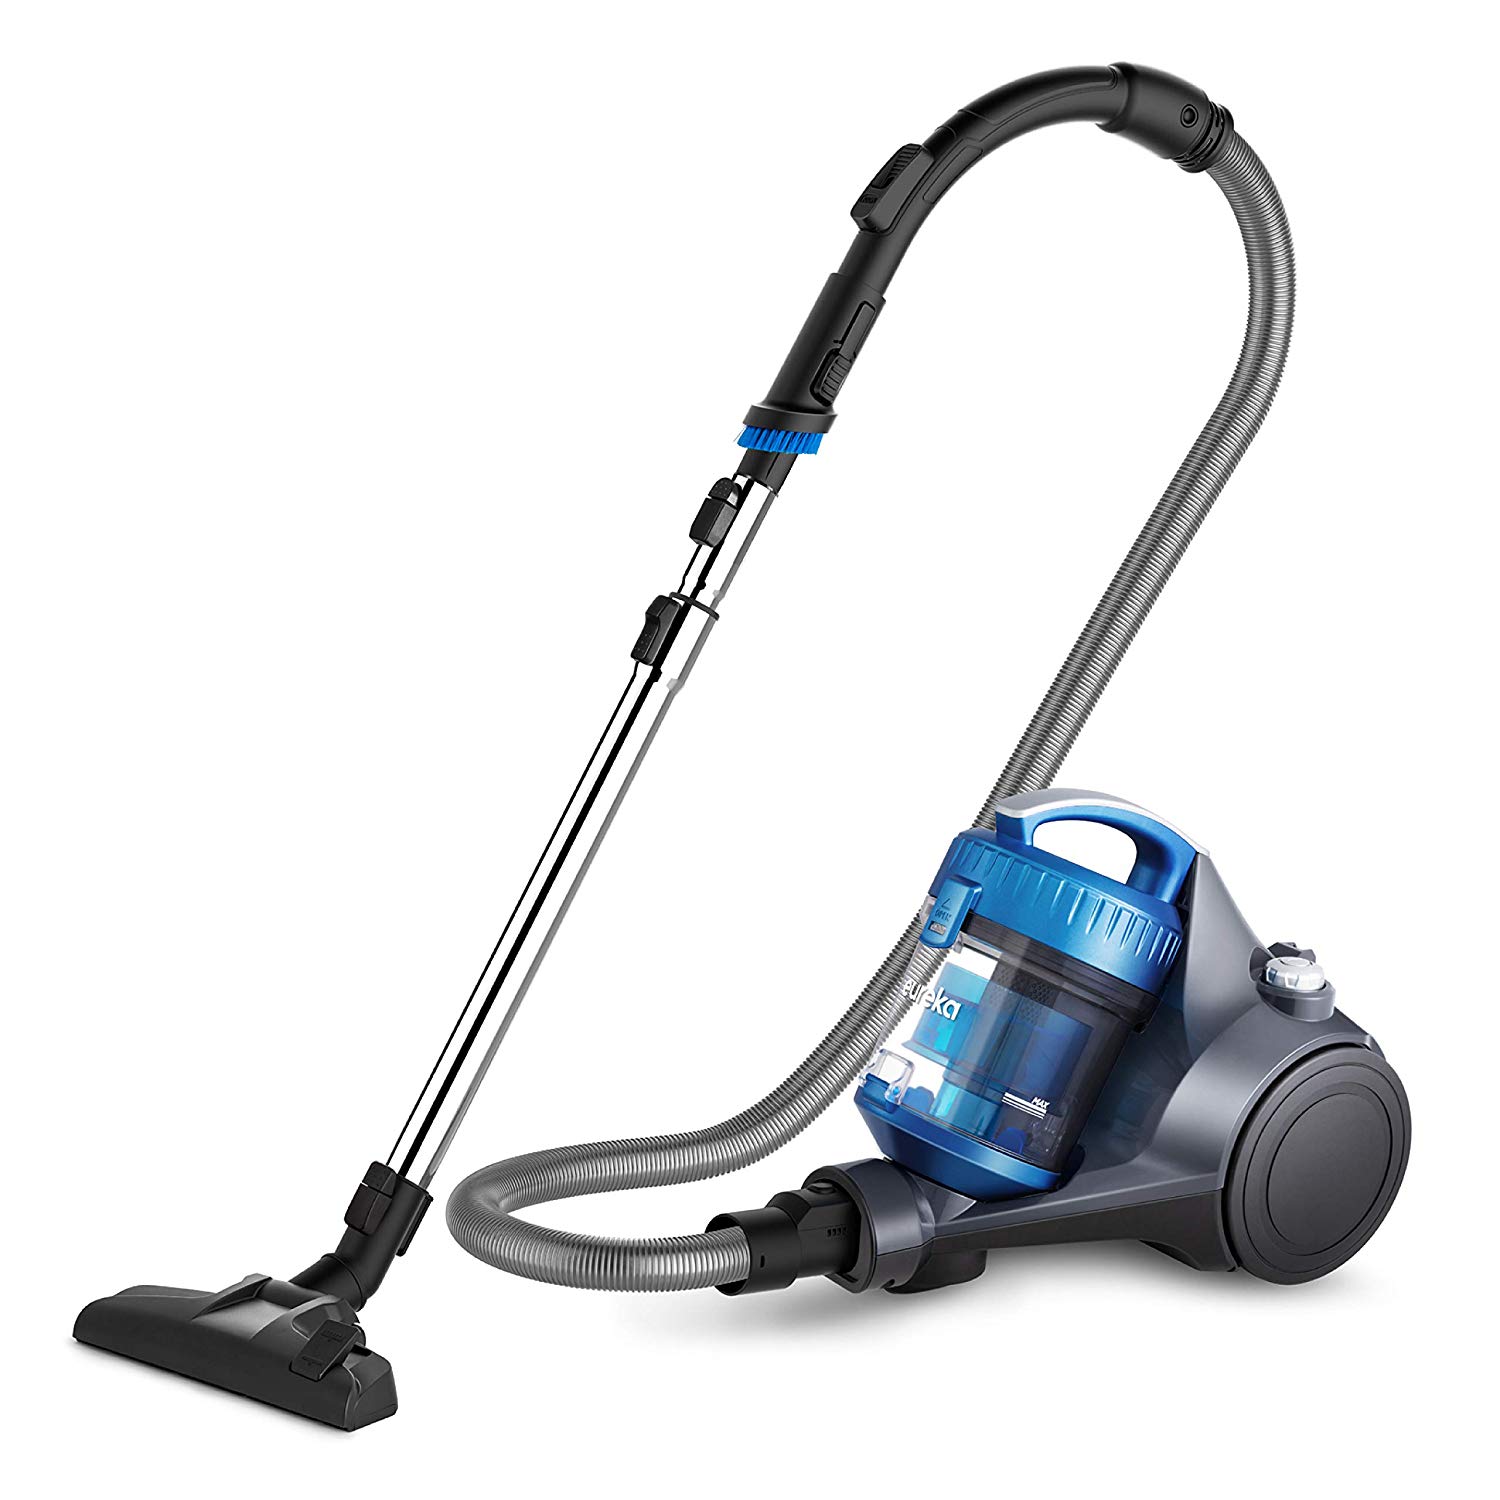 Top 3 Most Popular Types of Vacuum Cleaners A DIY Projects